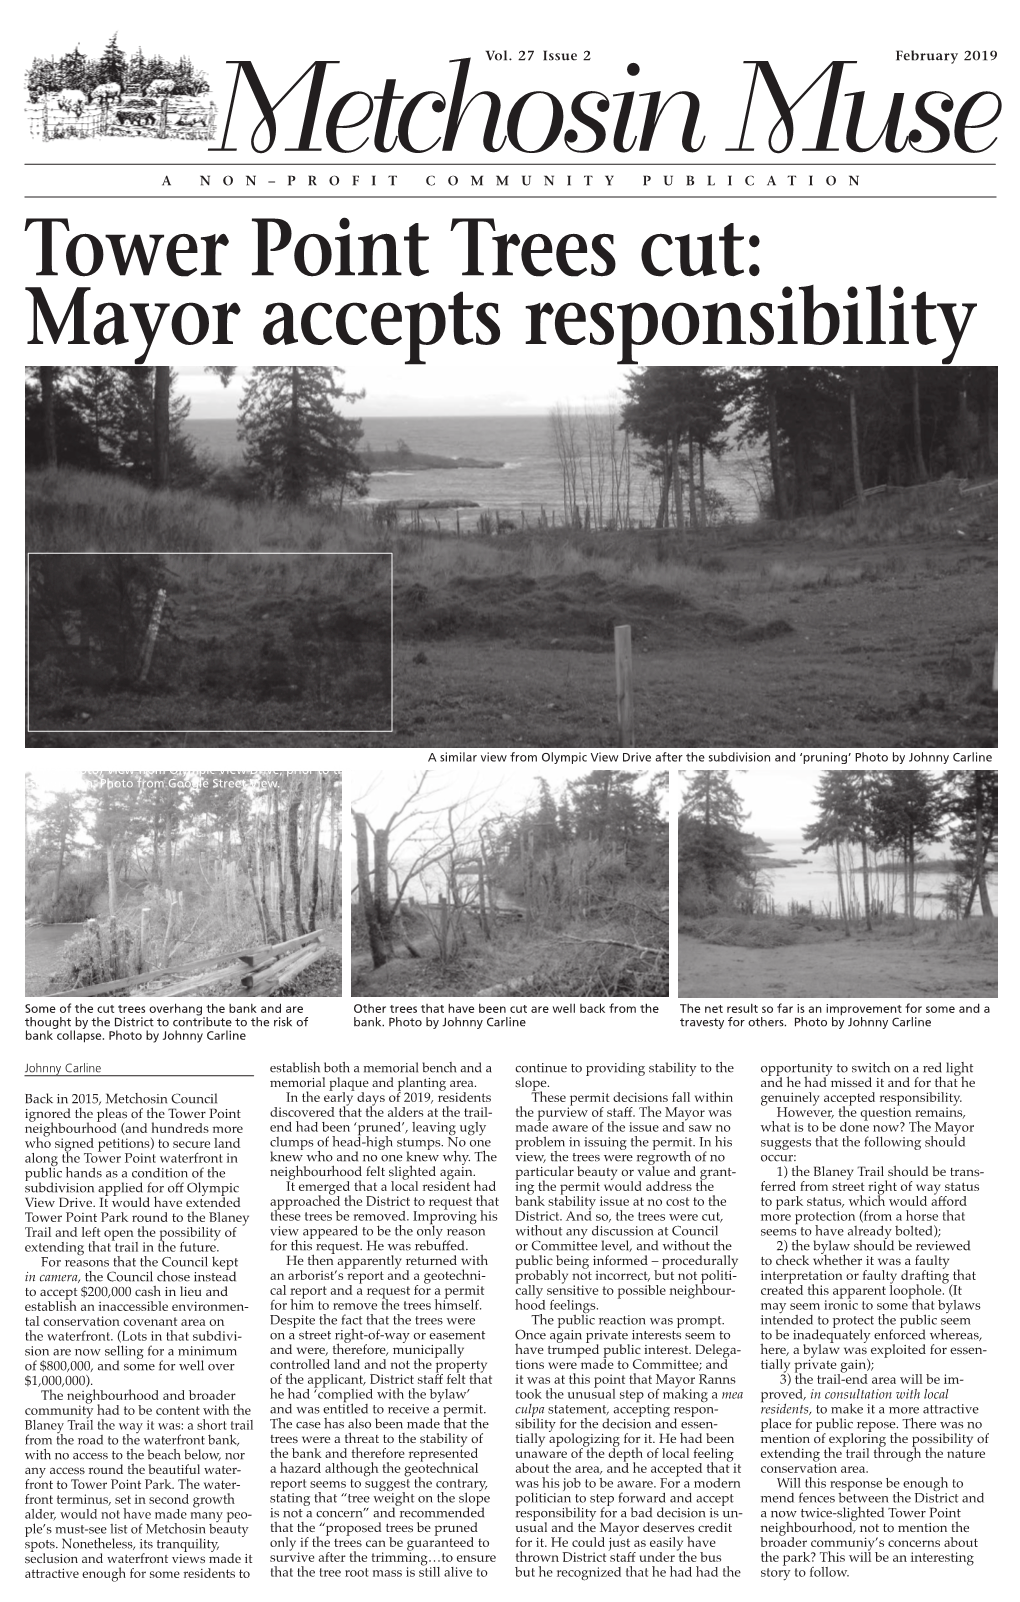 Tower Point Trees Cut: Mayor Accepts Responsibility